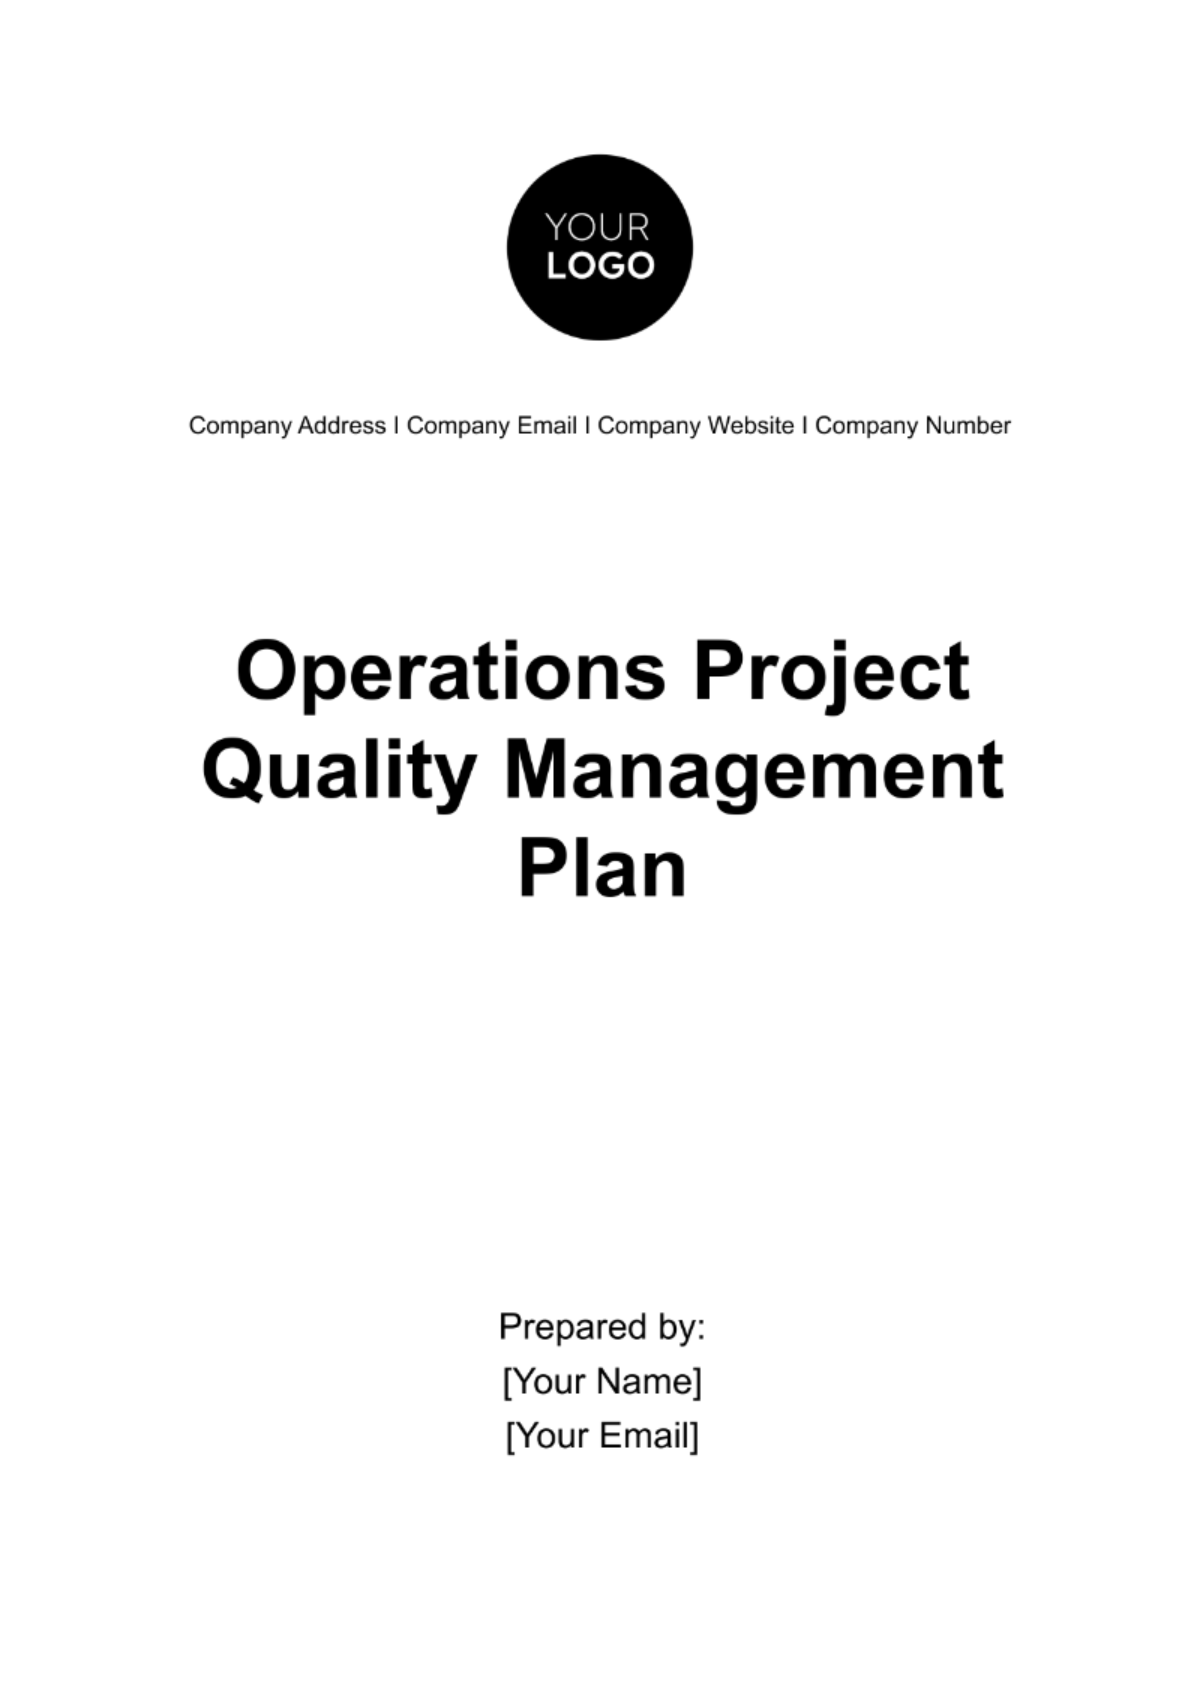 Operations Project Quality Management Plan Template